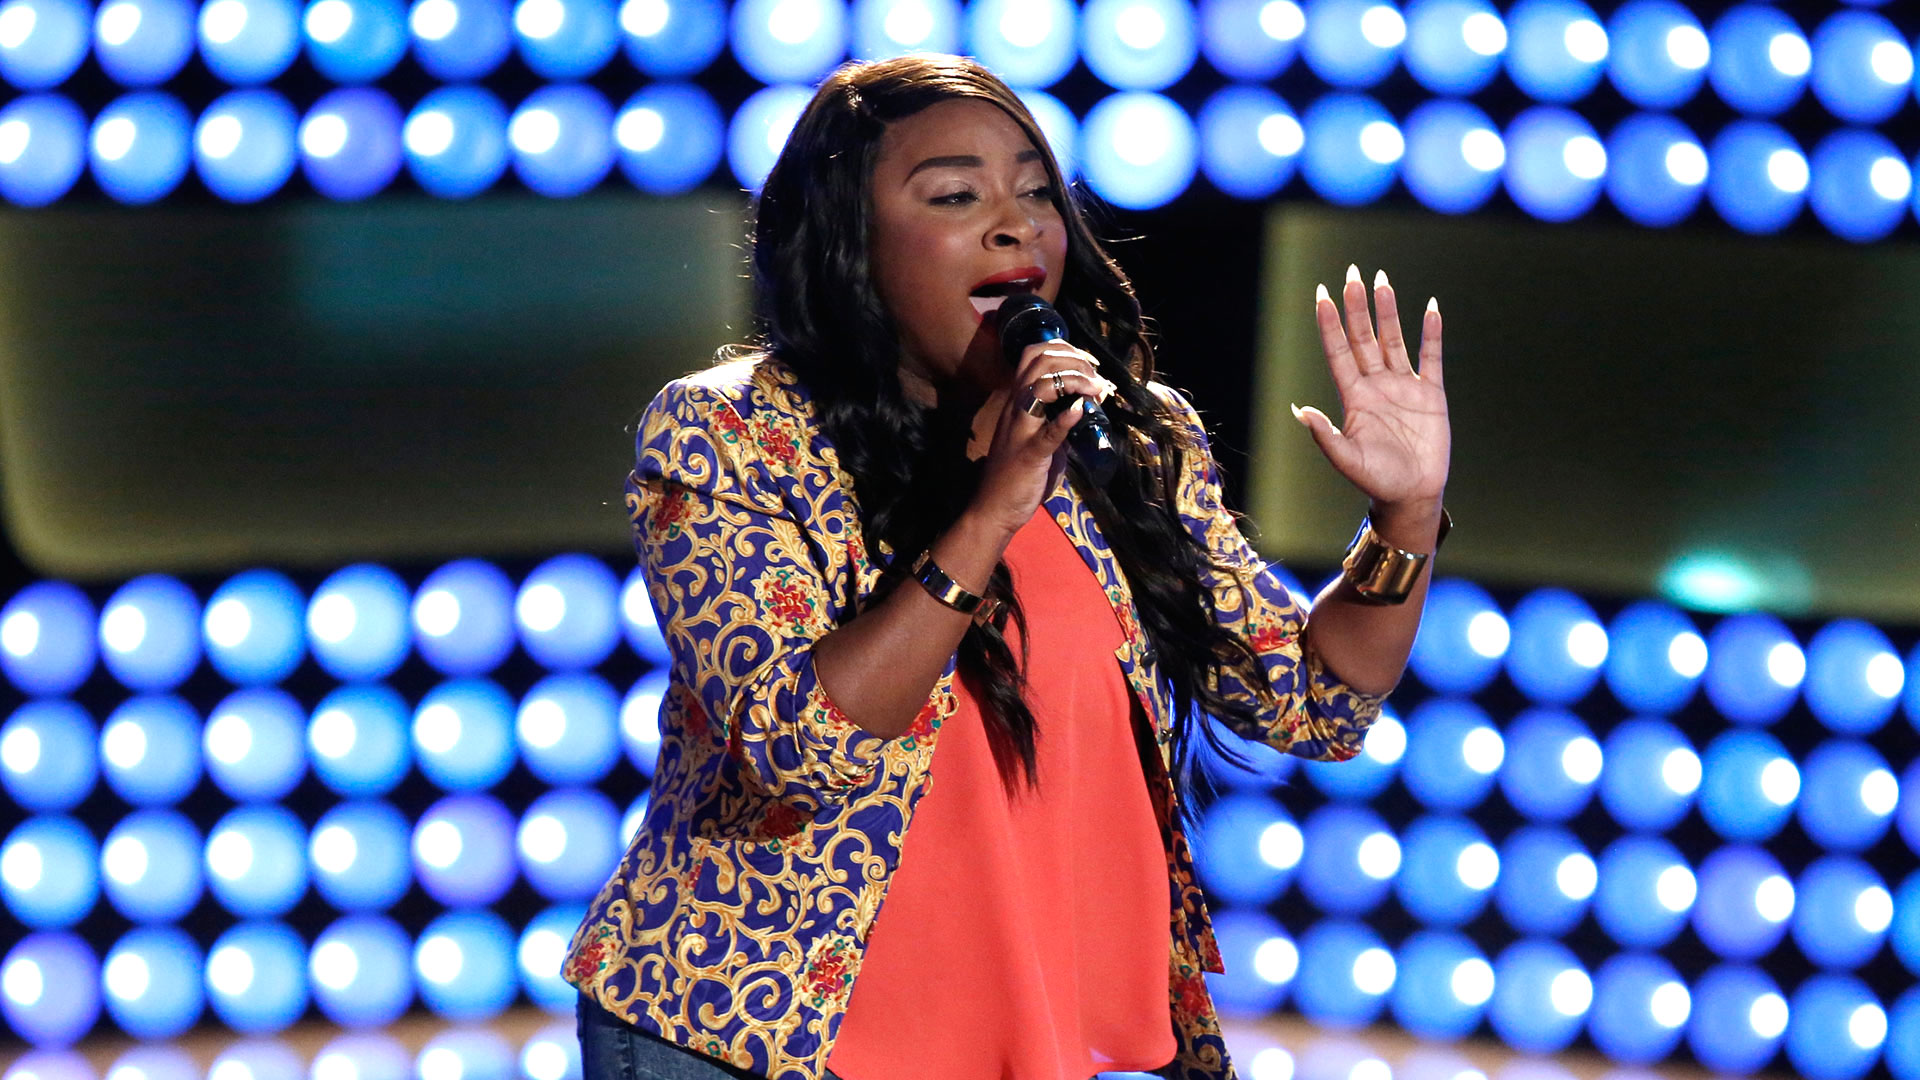 Watch The Voice Highlight: Toia Jones Audition: "One and Only" - NBC.com